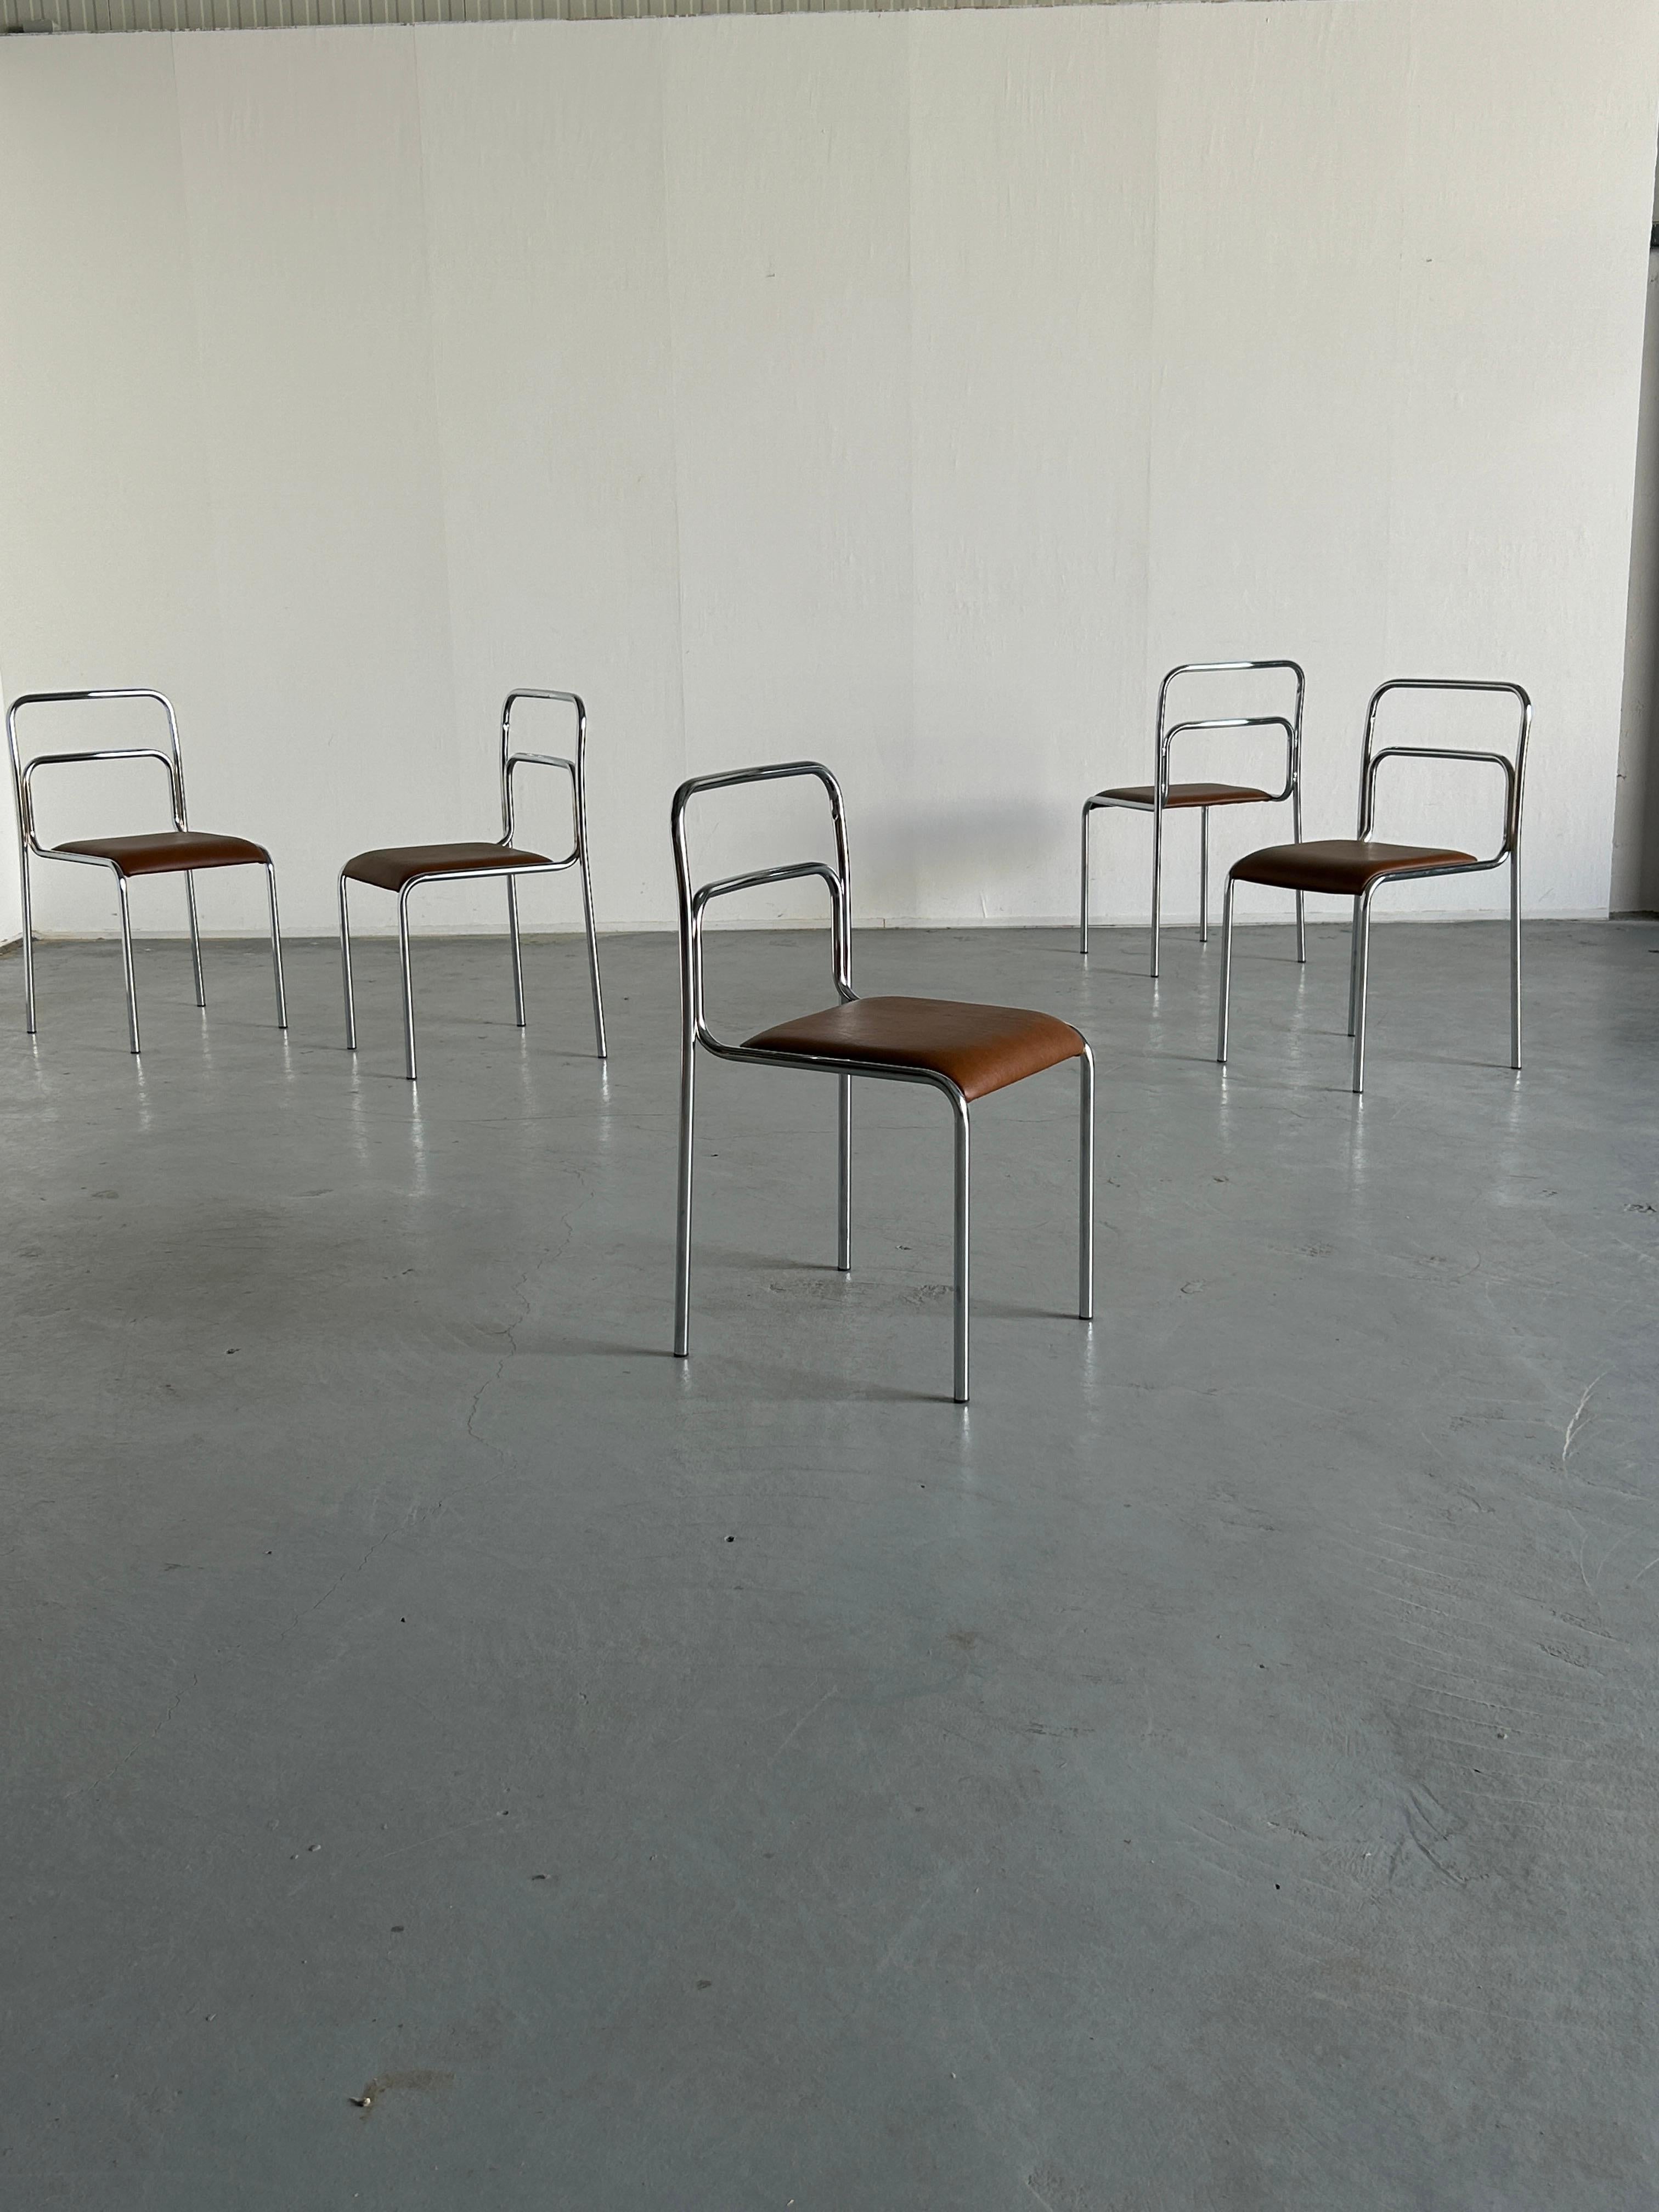 Italian modernist, Bauhaus design tubular chrome and brown faux leather stackable dining or living room chairs.
Italian design of the 1980s.

Price is per piece.
25 pieces available.

In excellent condition with minimal signs of age.
All chairs have